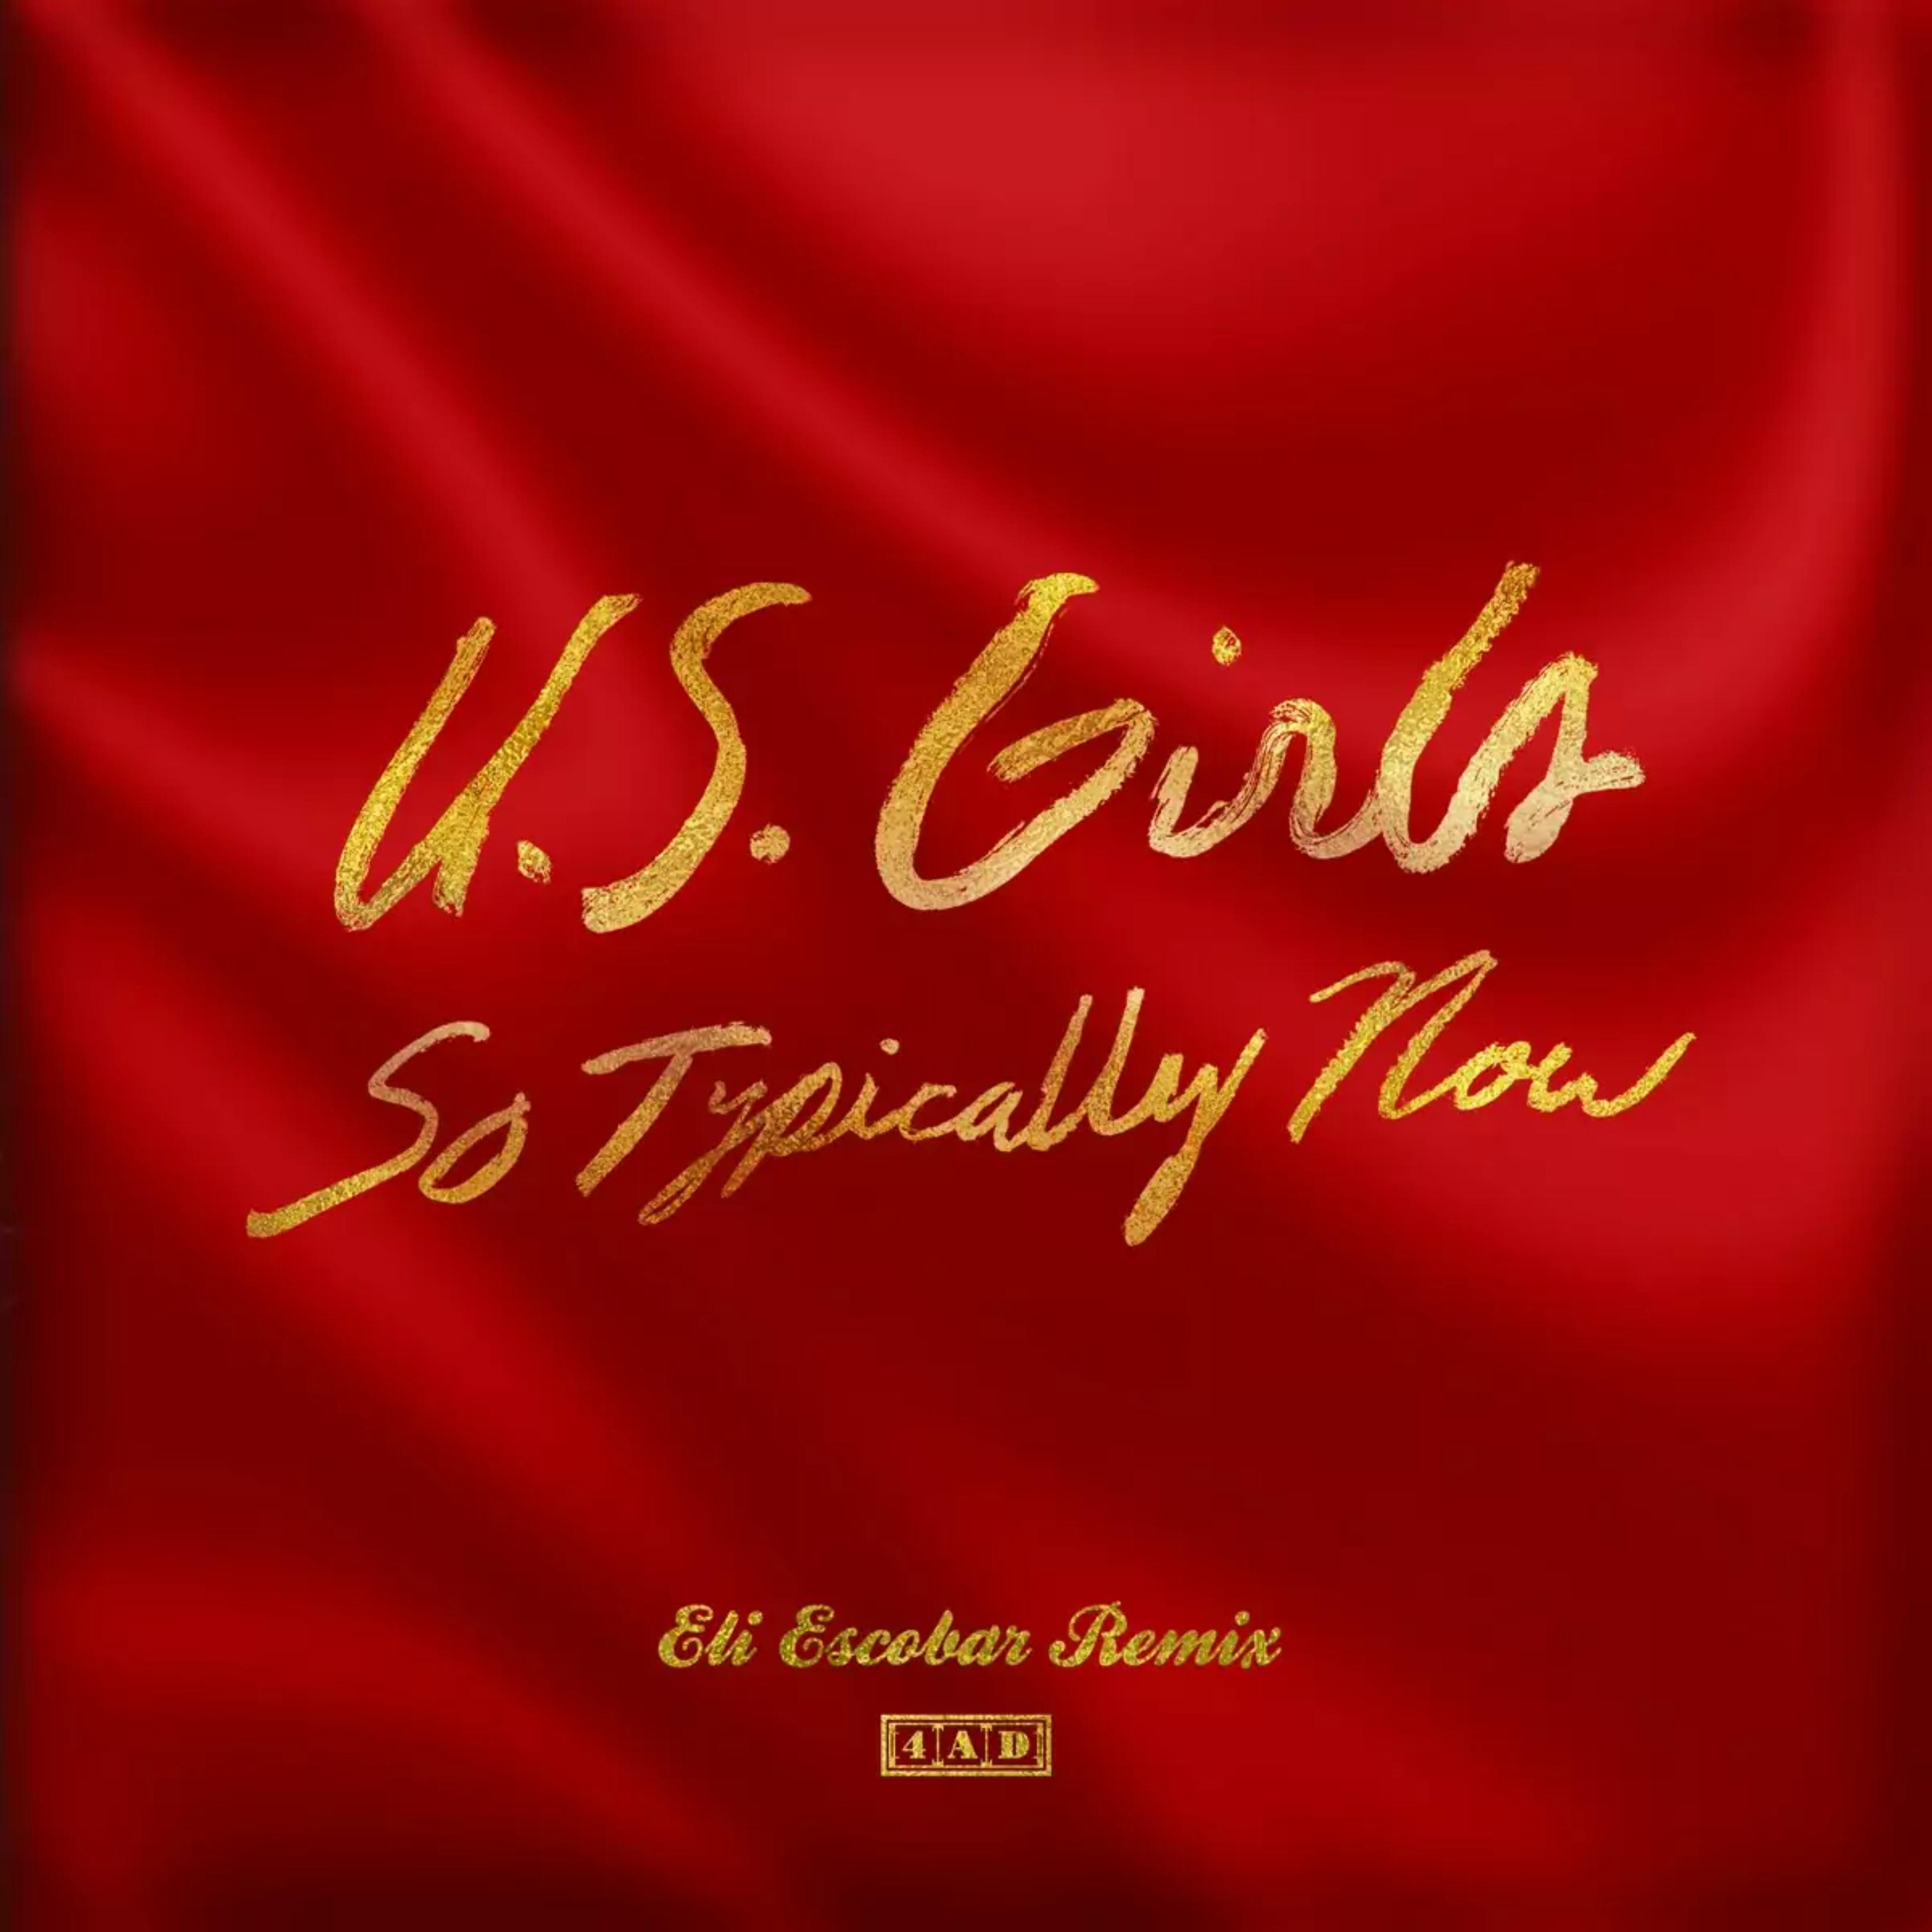 Artwork for So Typically Now (Eli Escobar Remix) by U.S. Girls